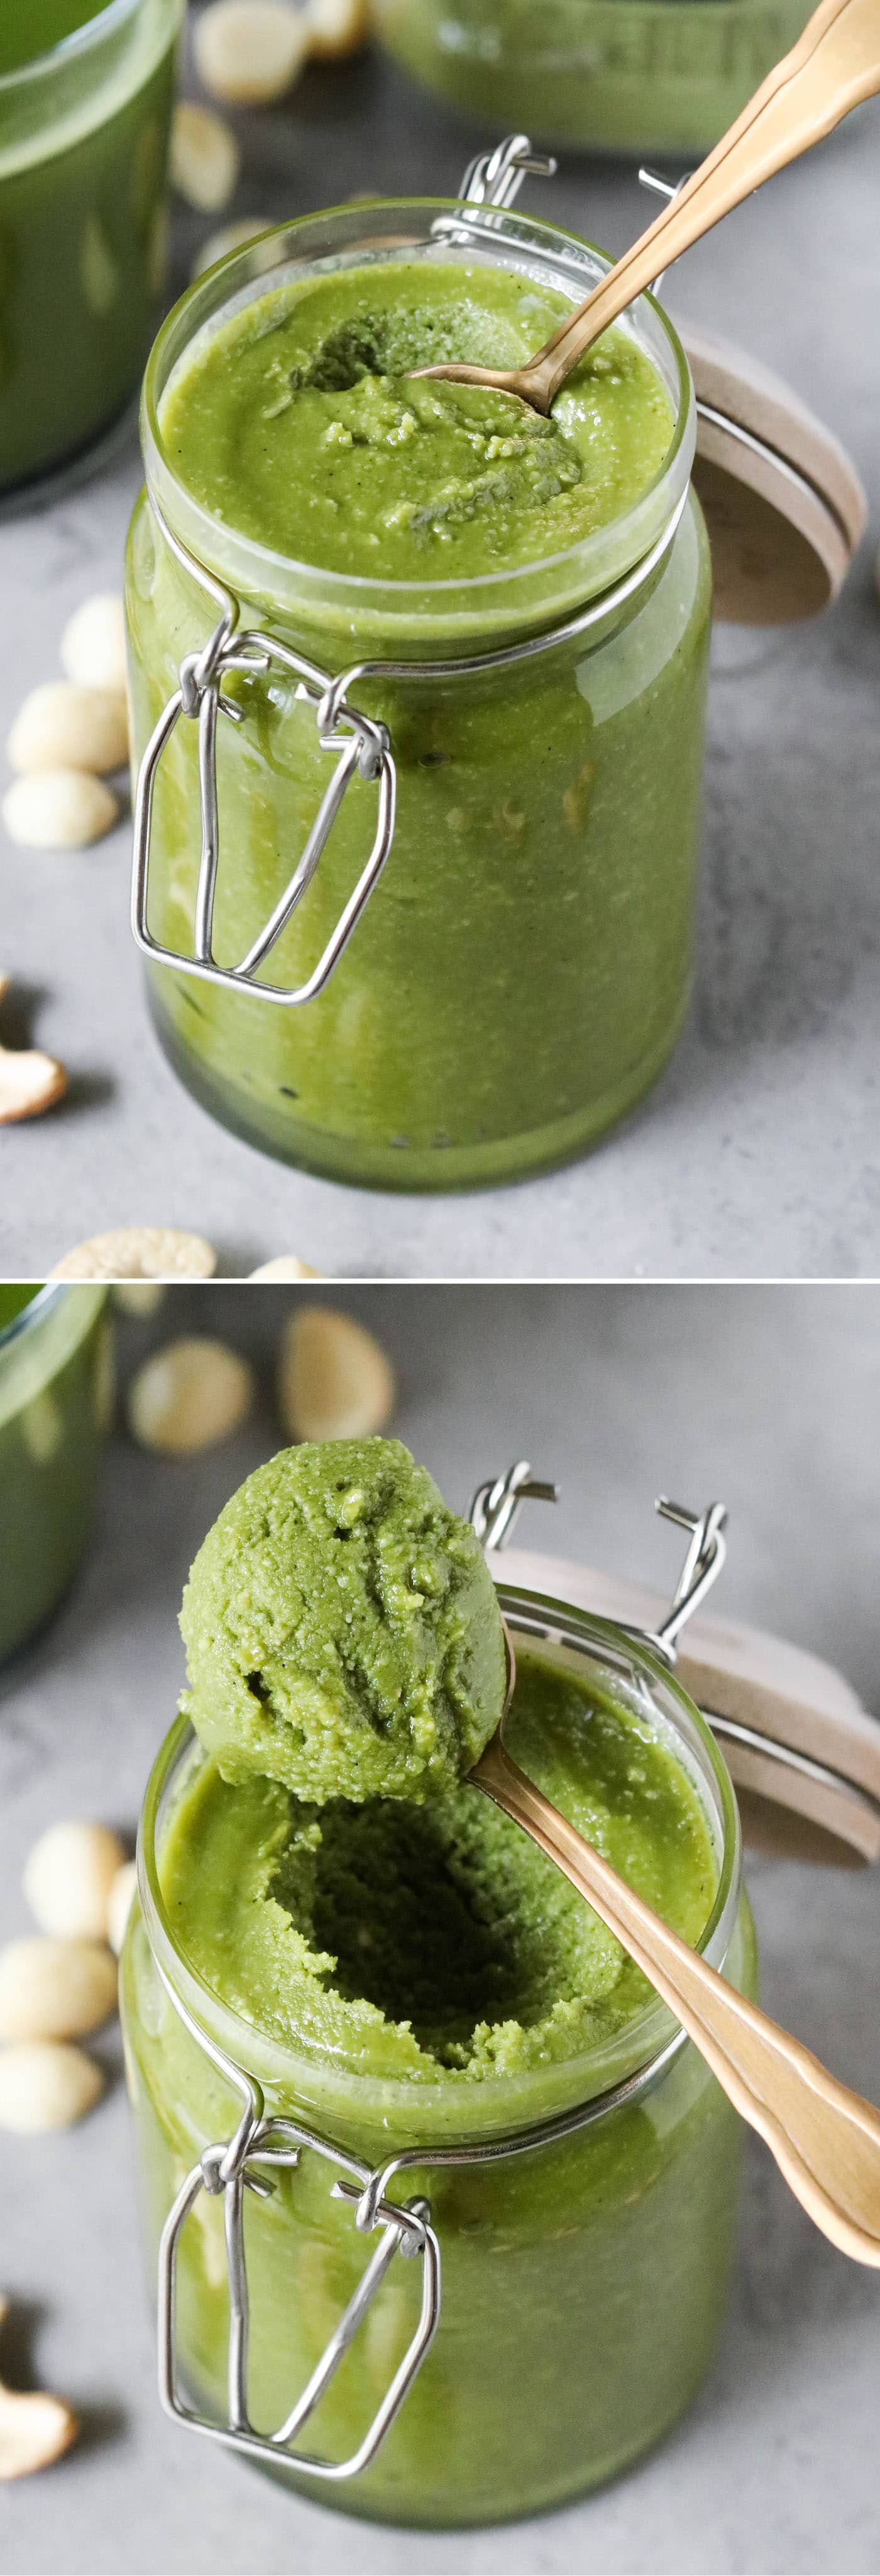 This 5-ingredient Healthy Matcha Green Tea Nut Butter is earthy from the matcha and rich and buttery from the macadamia nuts and cashews. Super easy, creamy, and addictive, yet sugar free, low carb, gluten free, dairy free, and vegan. It's just begging to be dug into with a spoon!